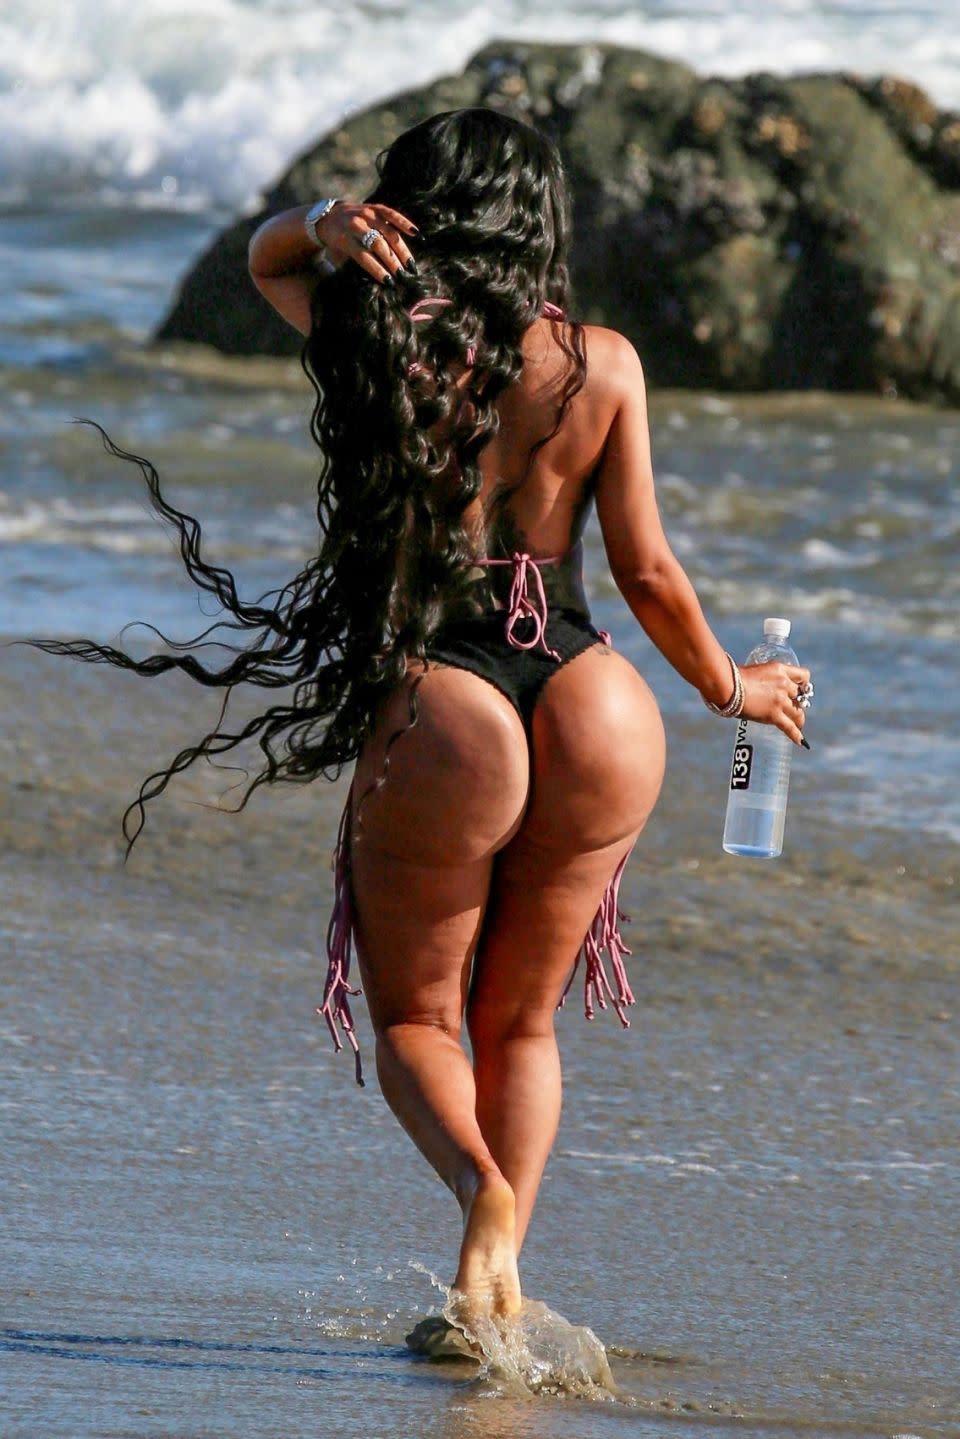 Perhaps taking some modelling tips from her former in-laws, Chyna had her derrière on show for the shoot. Source: Backgrid